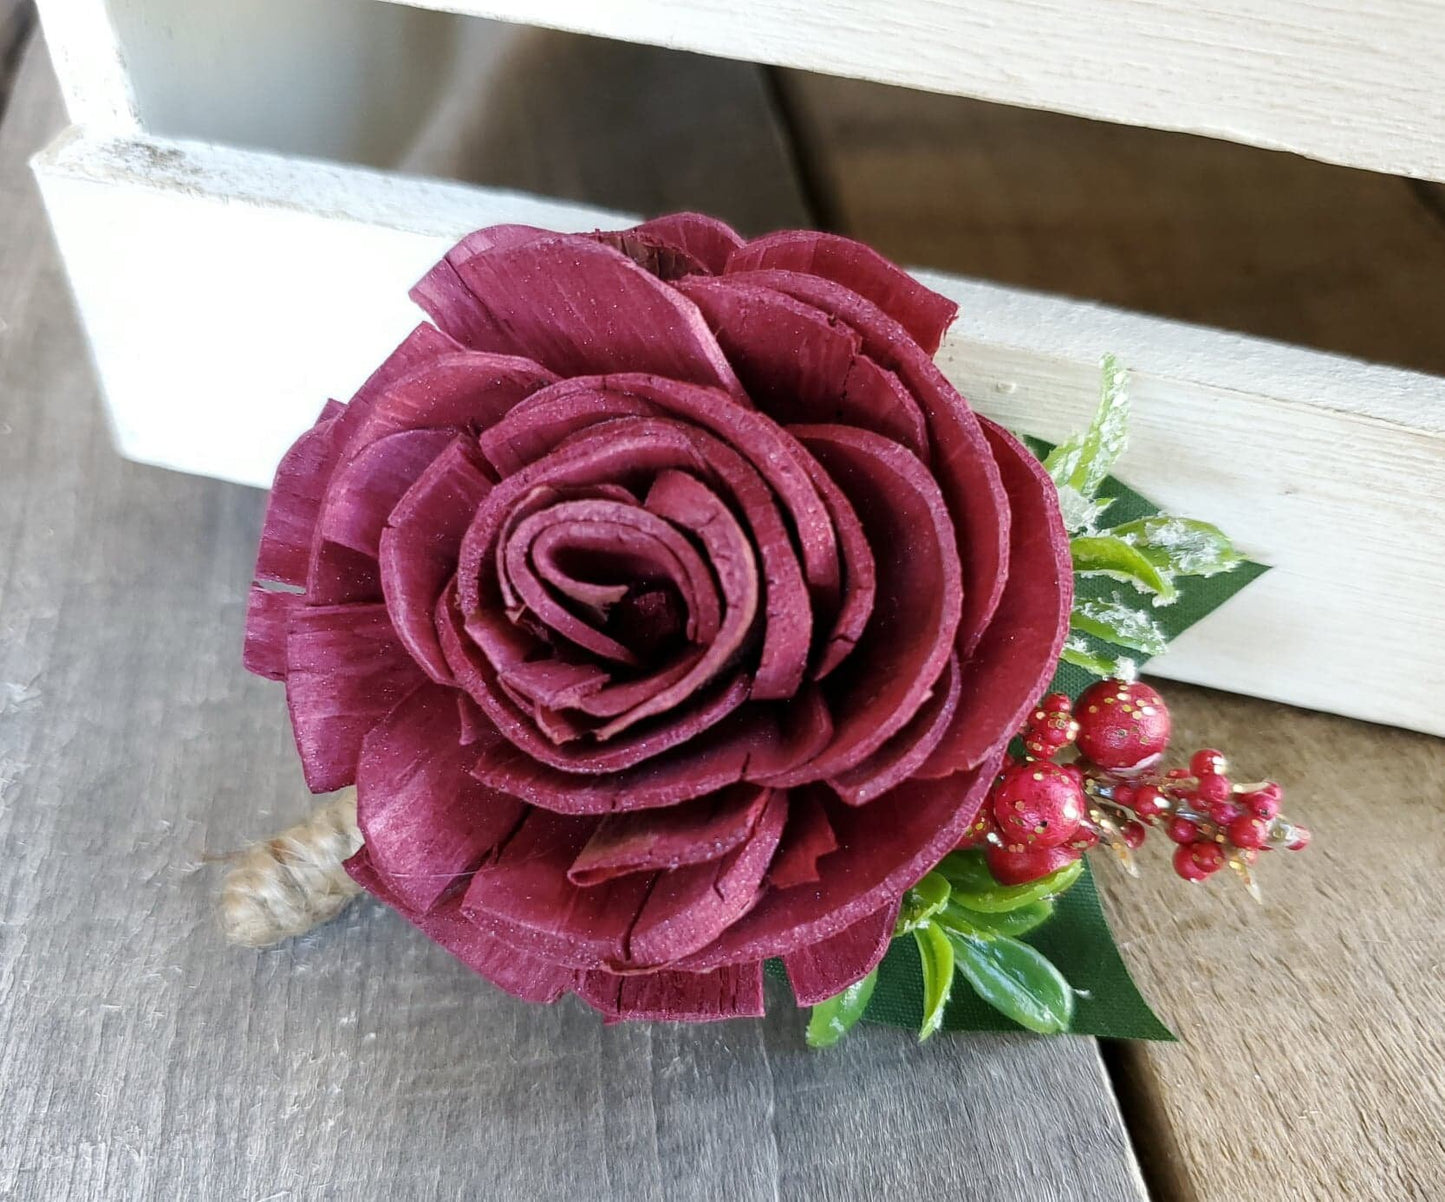 Christmas Wood Flower Boutonniere, Holiday Wedding Flowers, Christmas Wedding Boutonniere, Groom Flower, Lapel Pin, Groomsmen Pinned Flower